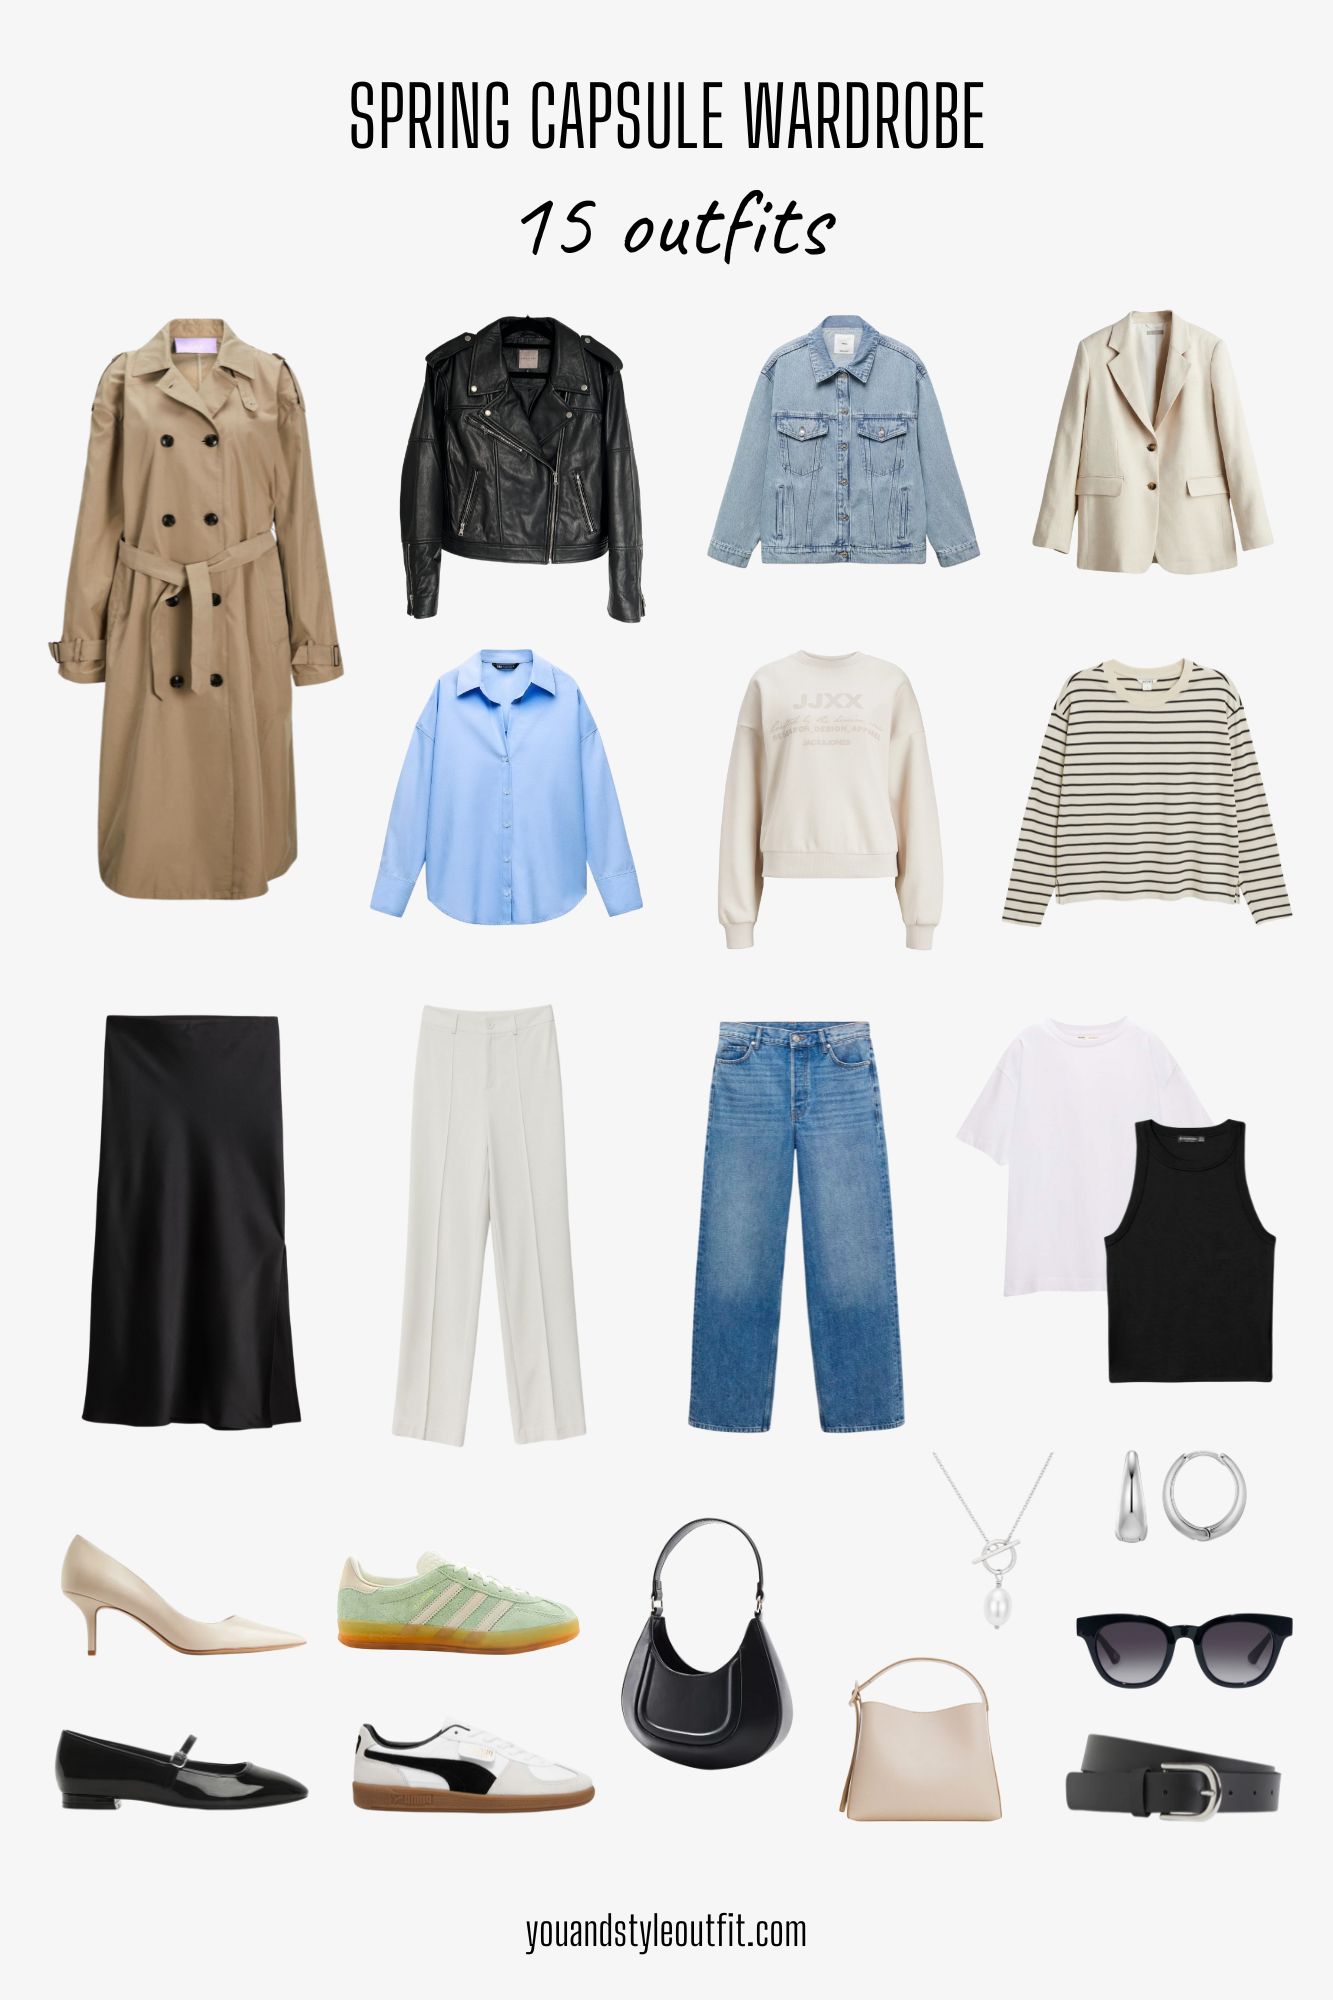 Spring Capsule Wardrobe: 15 Outfits